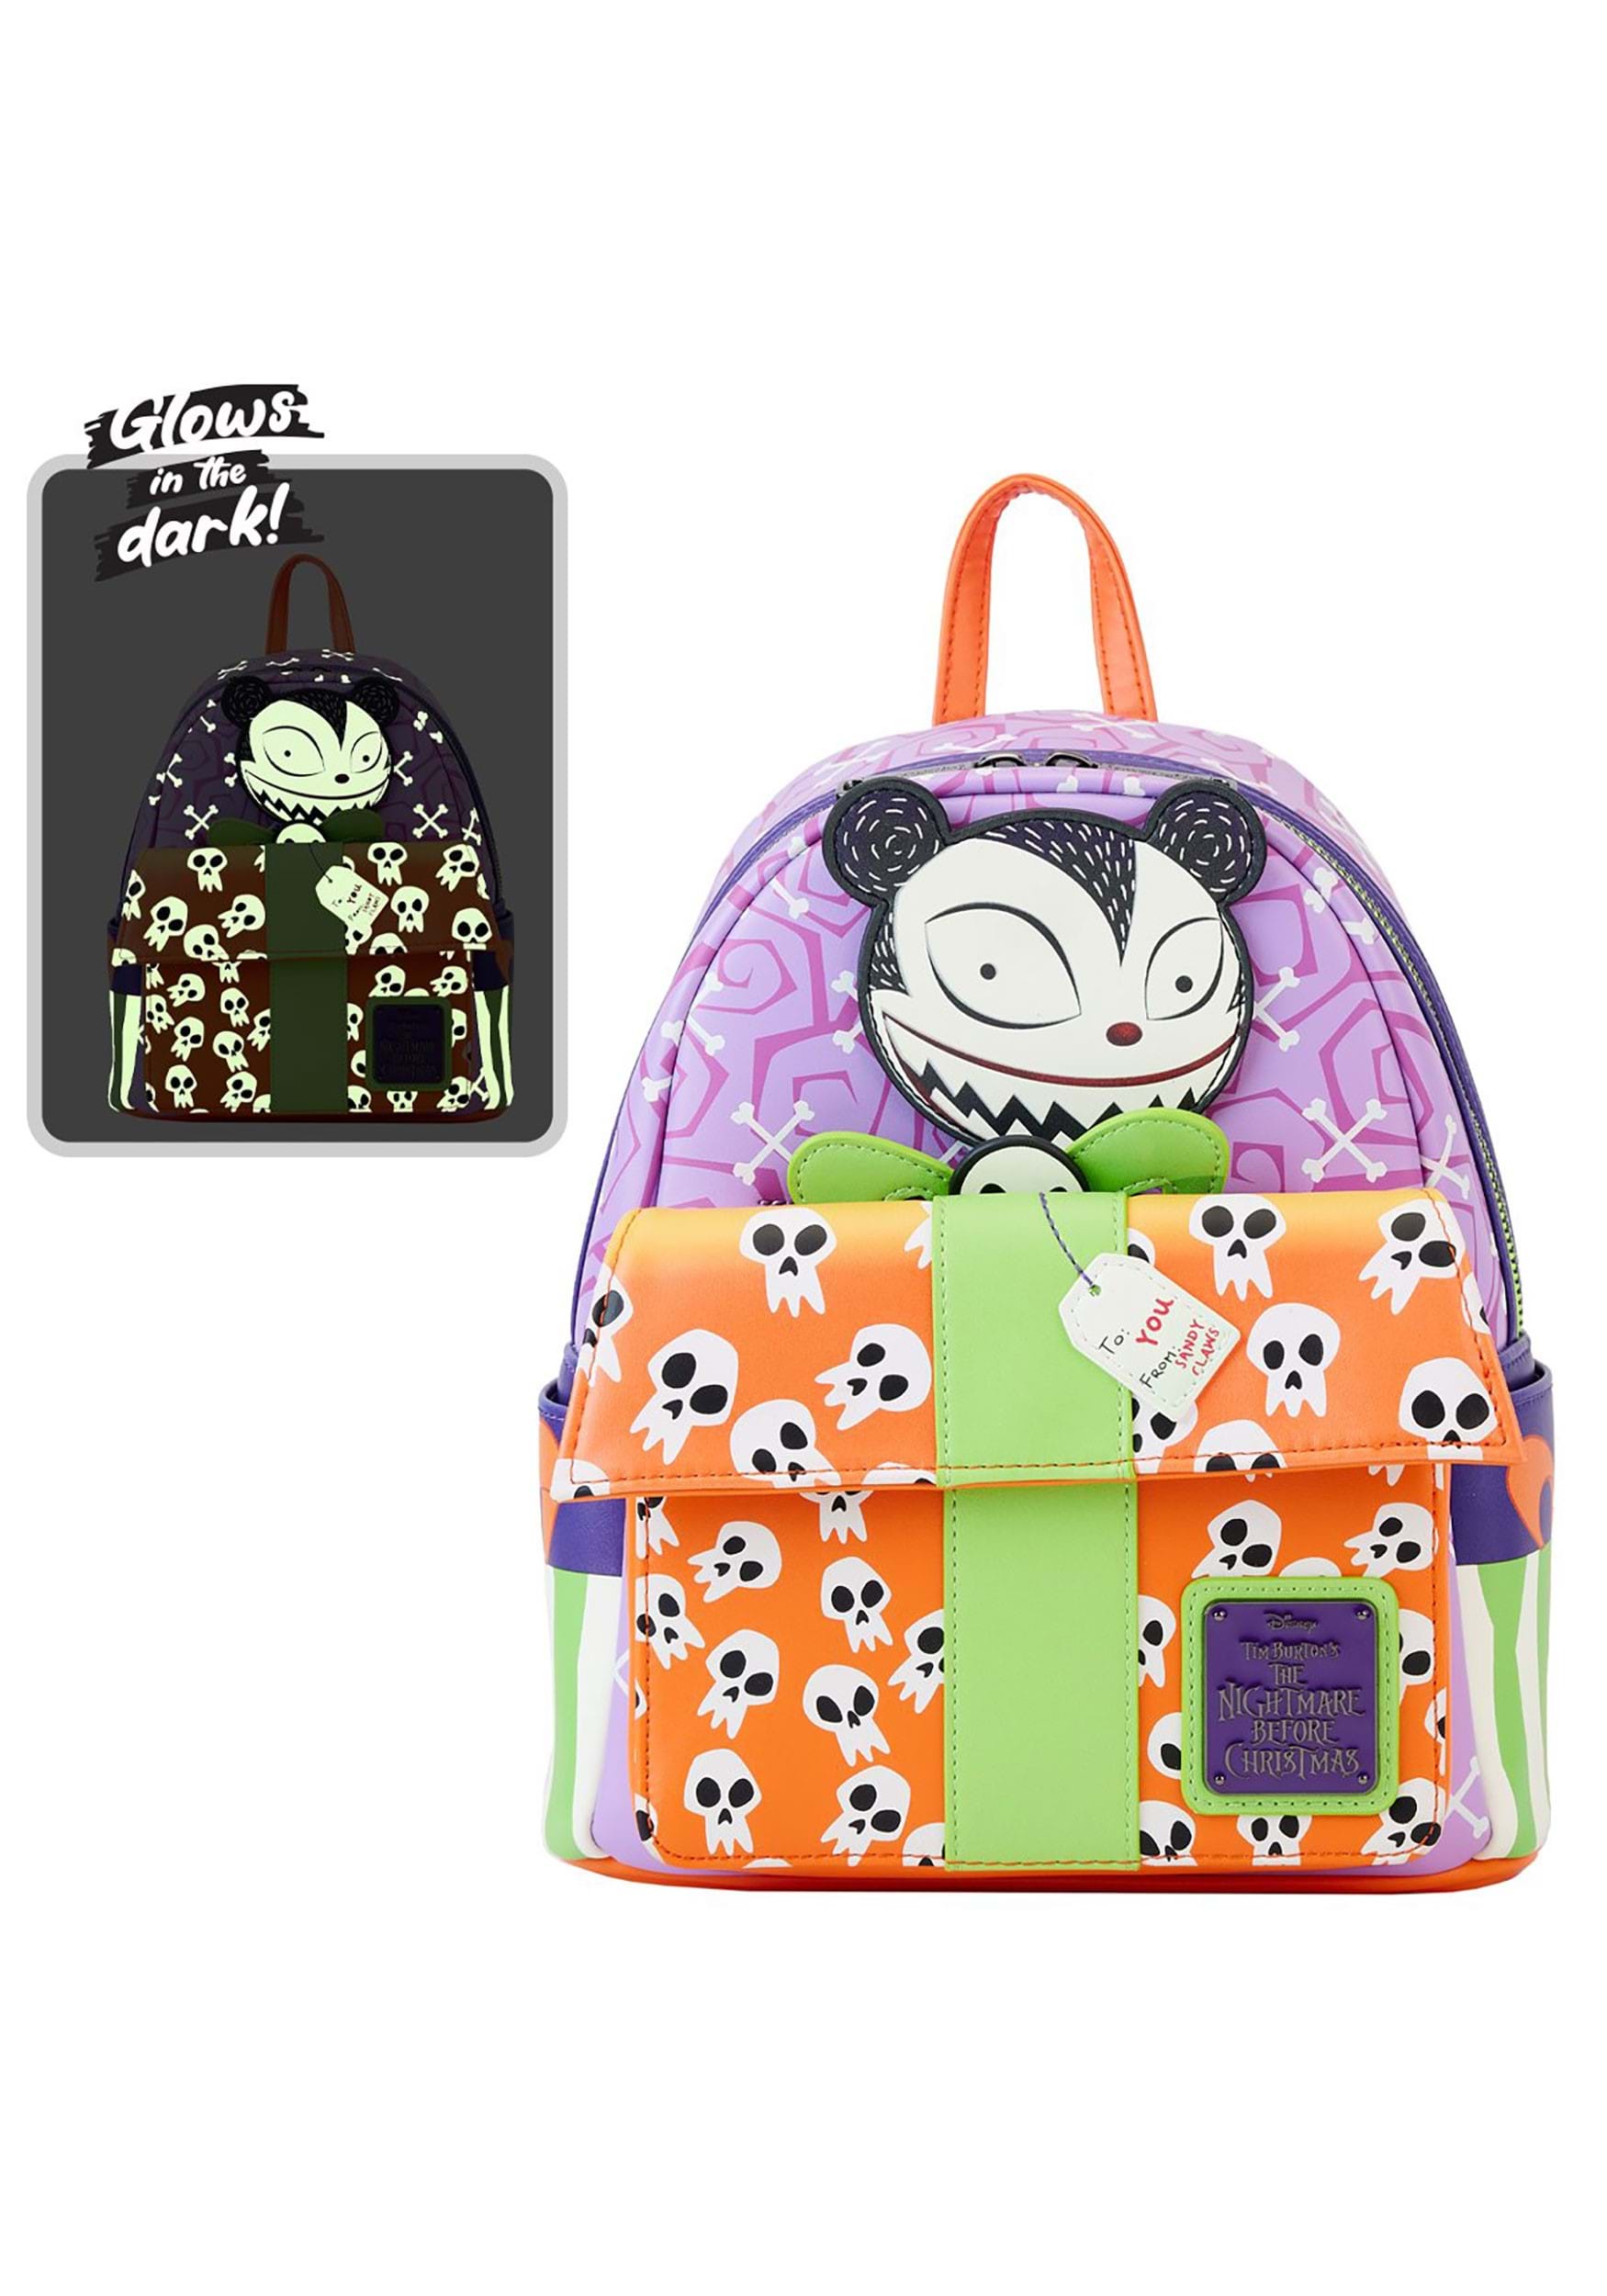 Disney Nightmare Before Christmas Scary Teddy Present Loungefly Mini Backpack